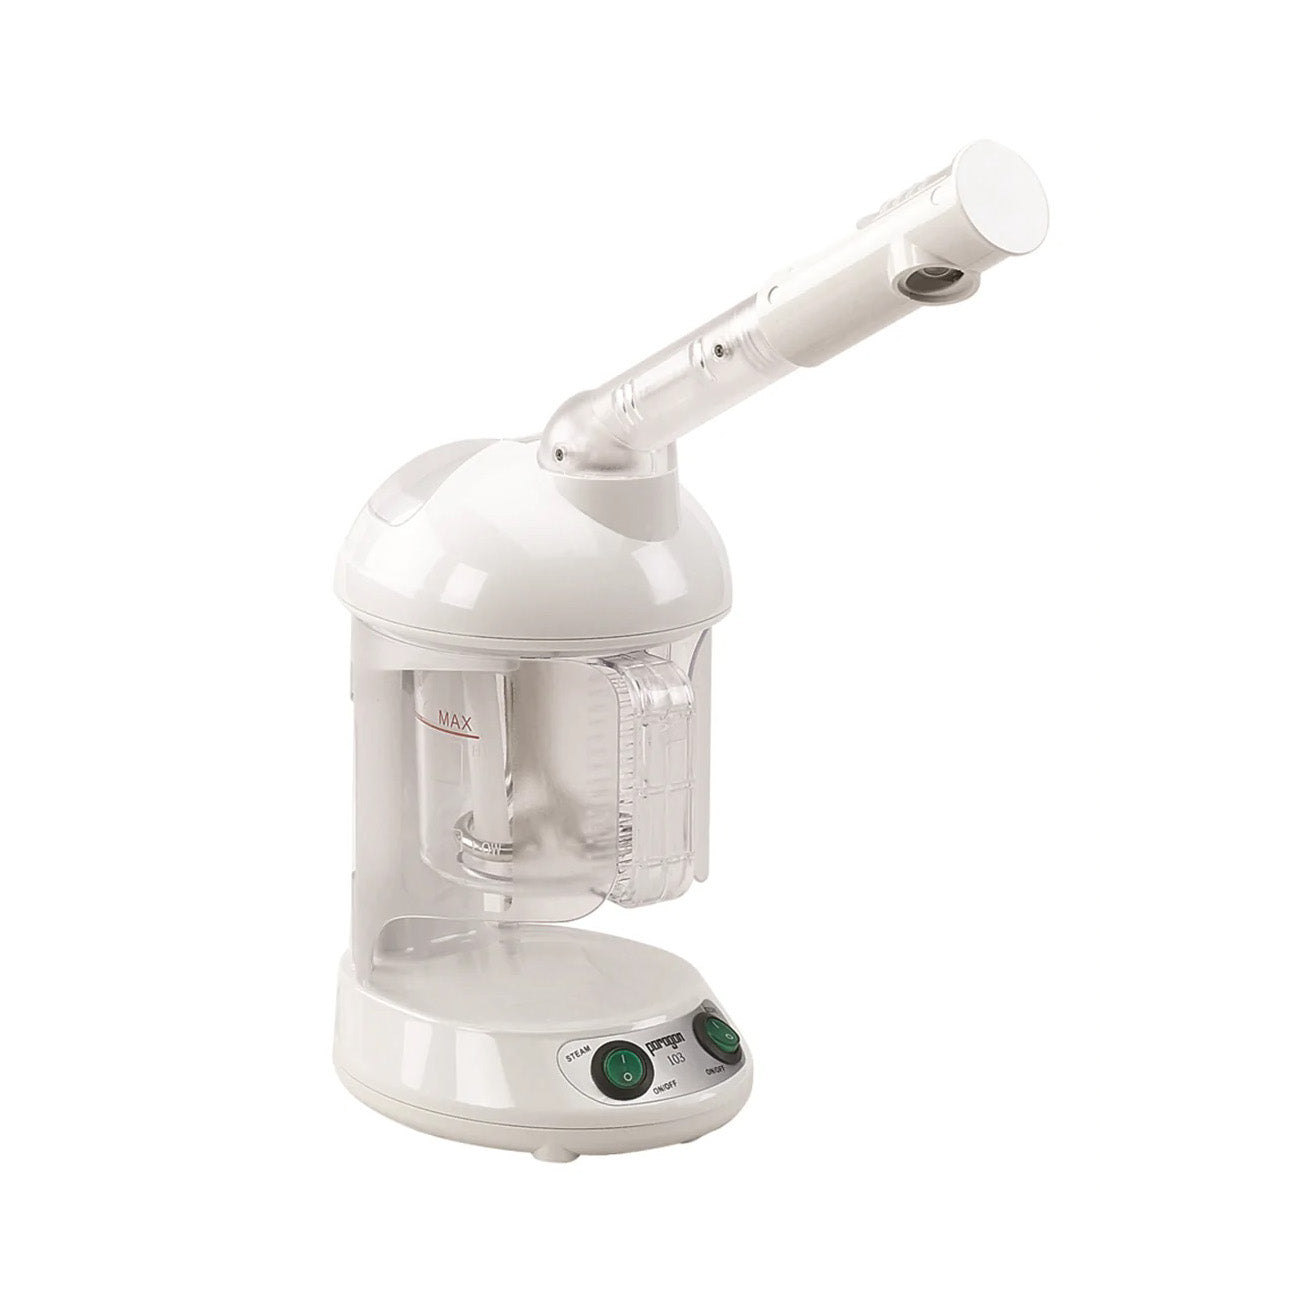 Table Top Facial Steamer - Collins - Salon Equipment and Barber Equipment